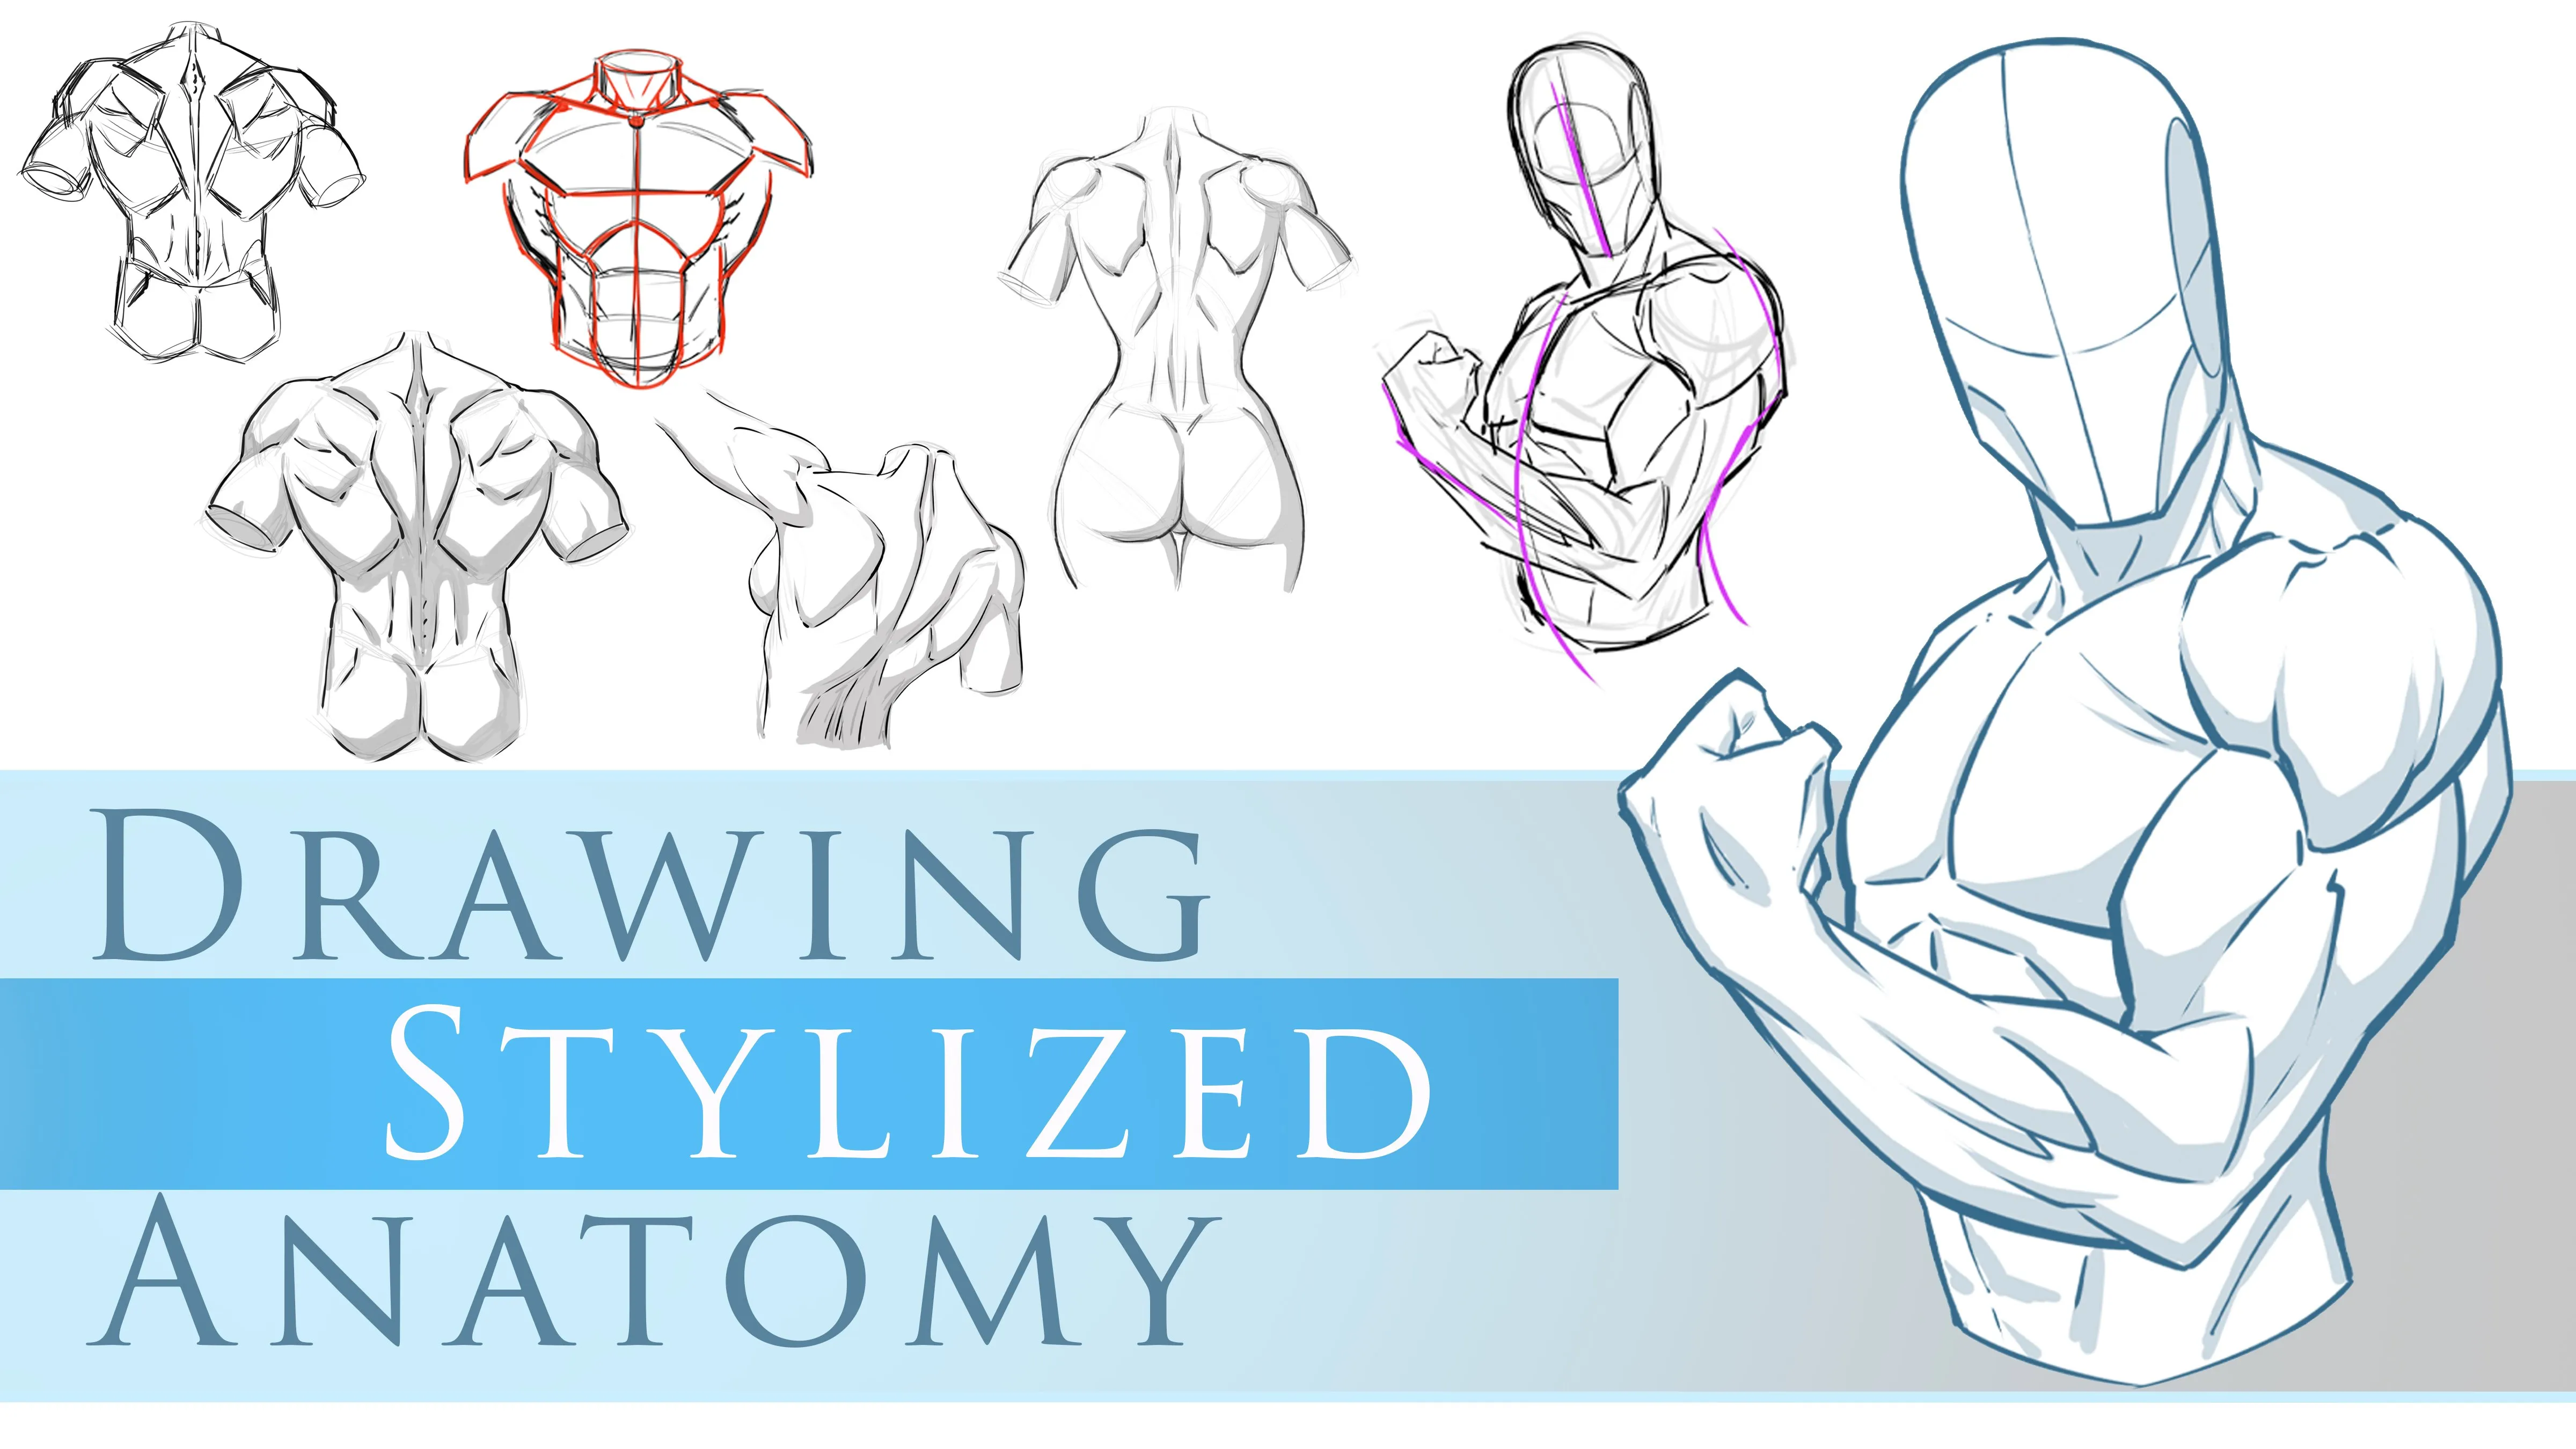 How to Draw Stylized Poses and Anatomy - Breaking Down the Basic Shapes